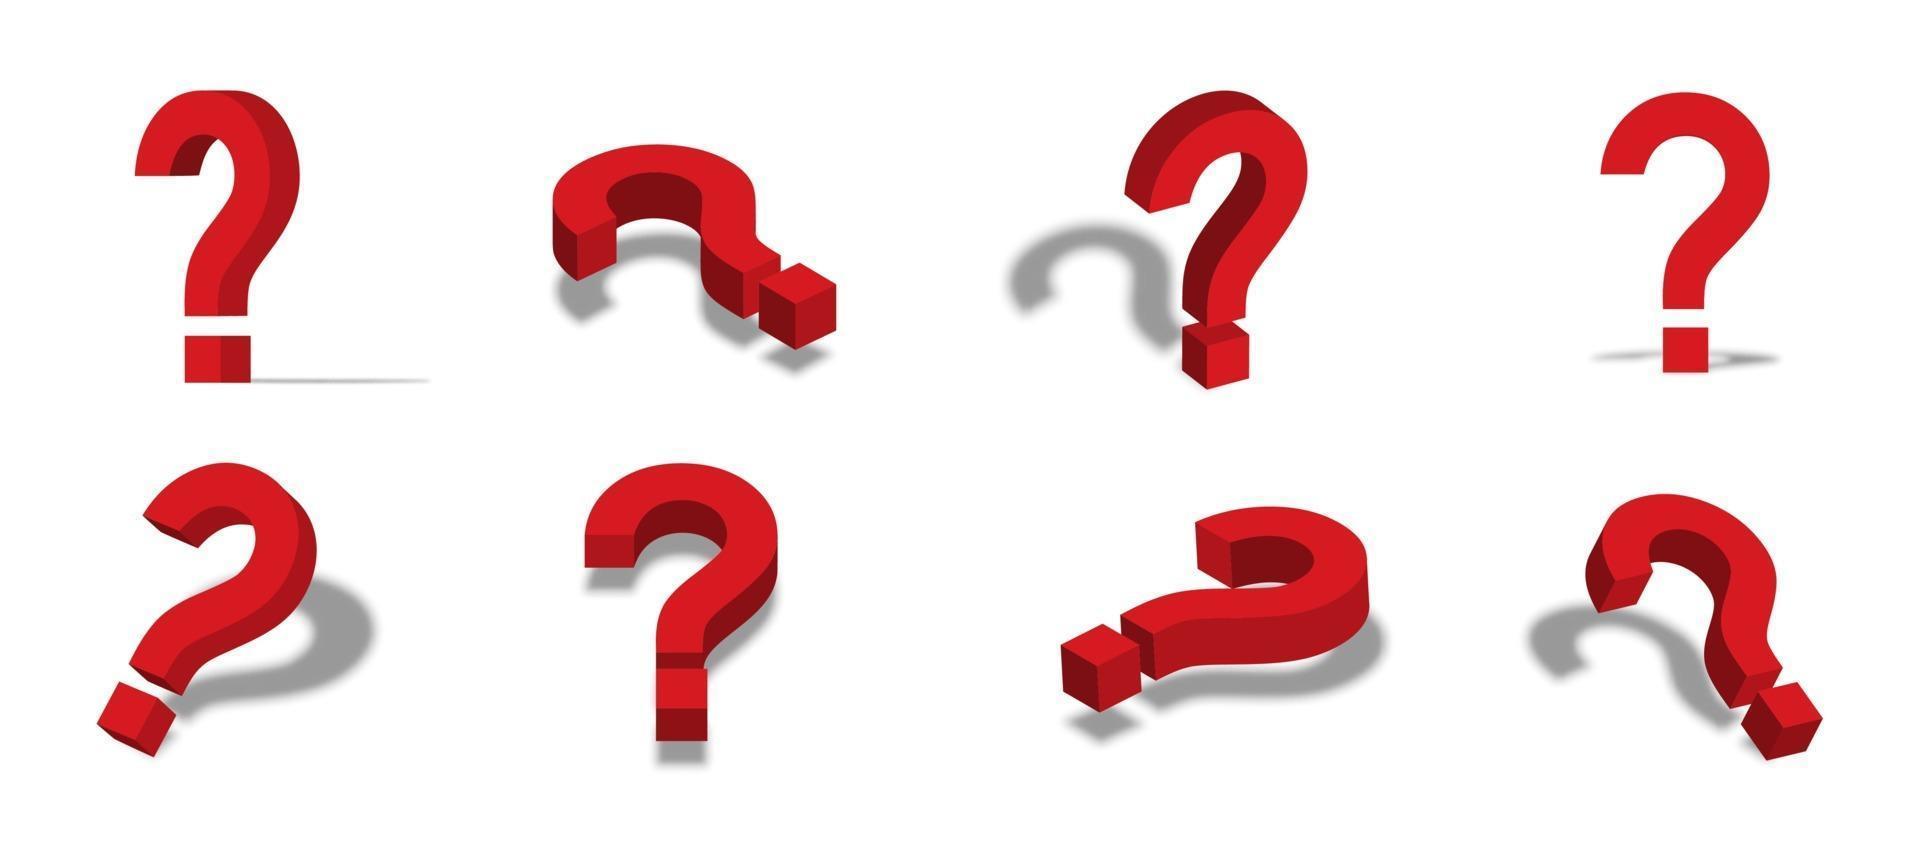 Red question mark 3d icon illustration with different views and angles vector